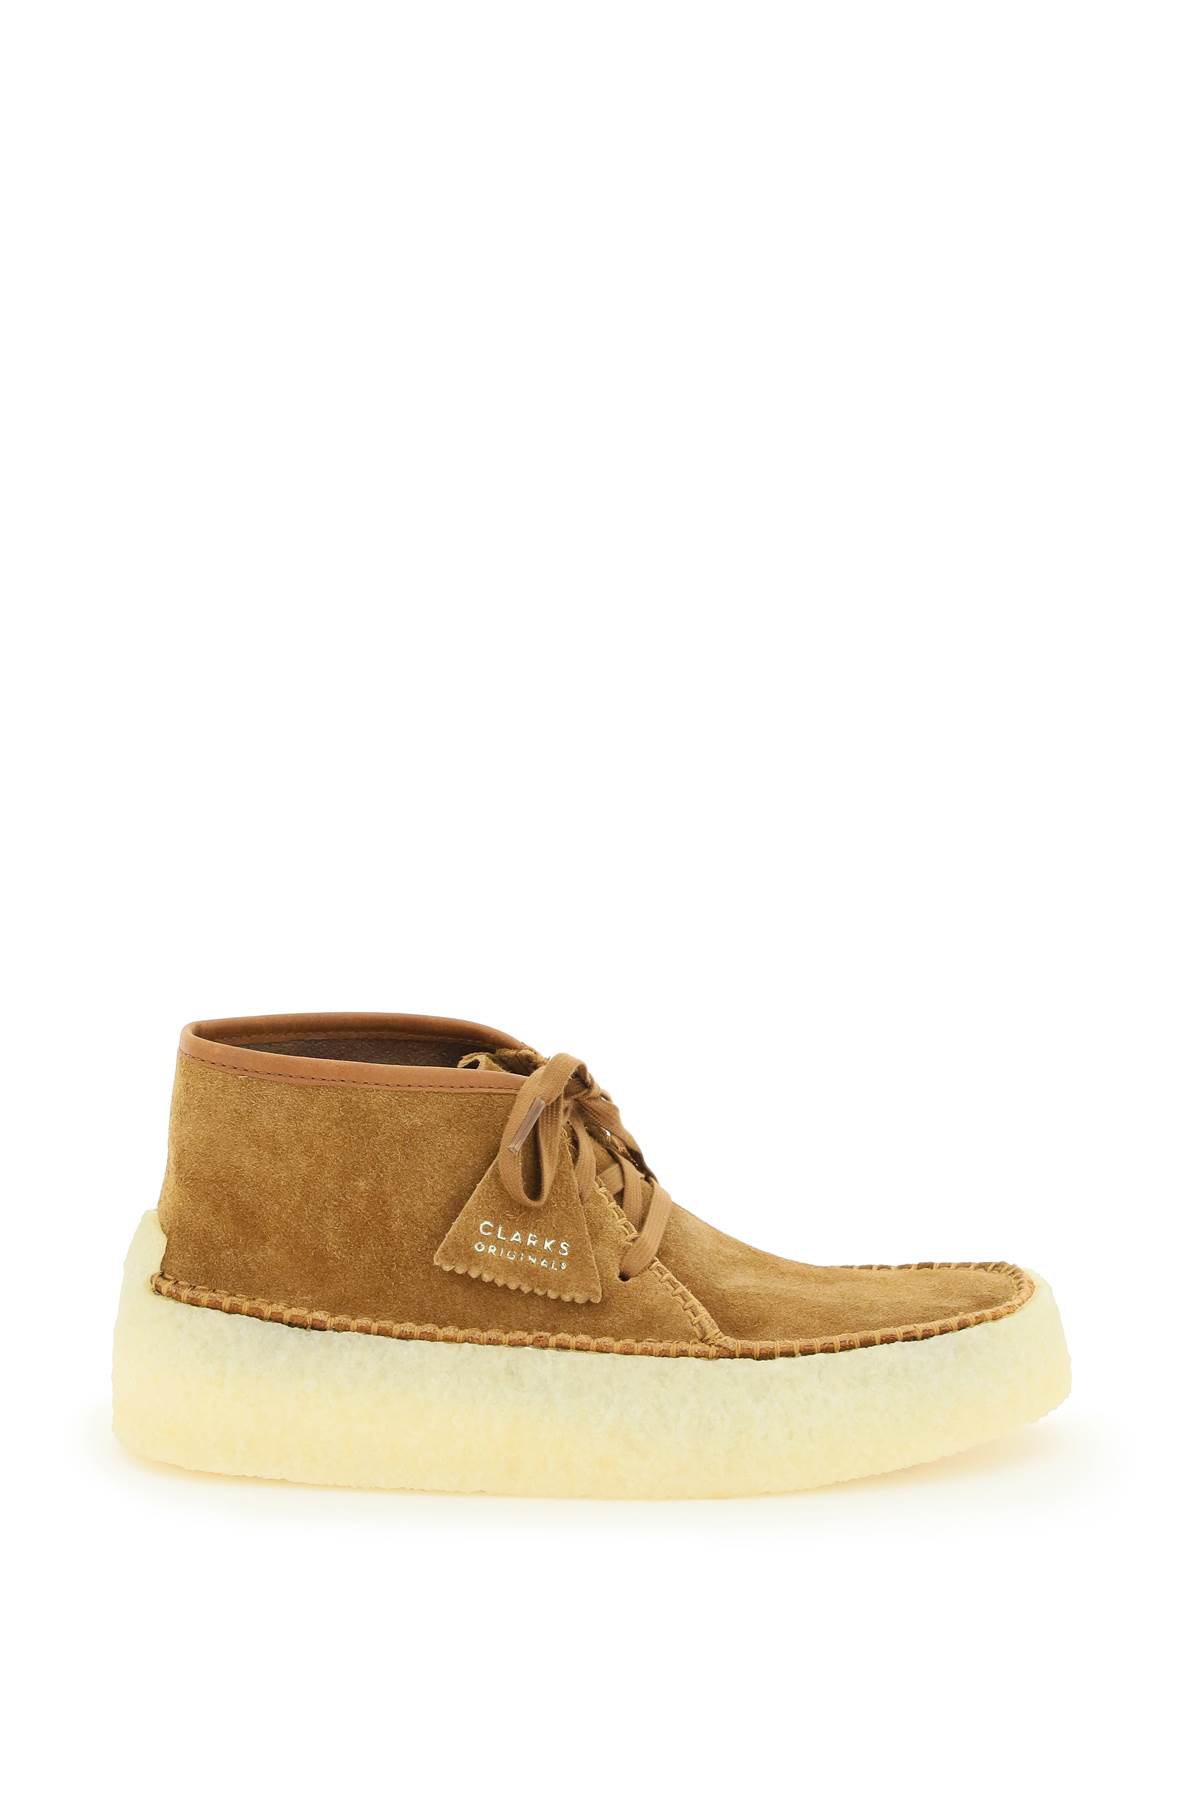 Shop Clarks Suede Leather Caravan Lace-up Shoes In Cola (brown)